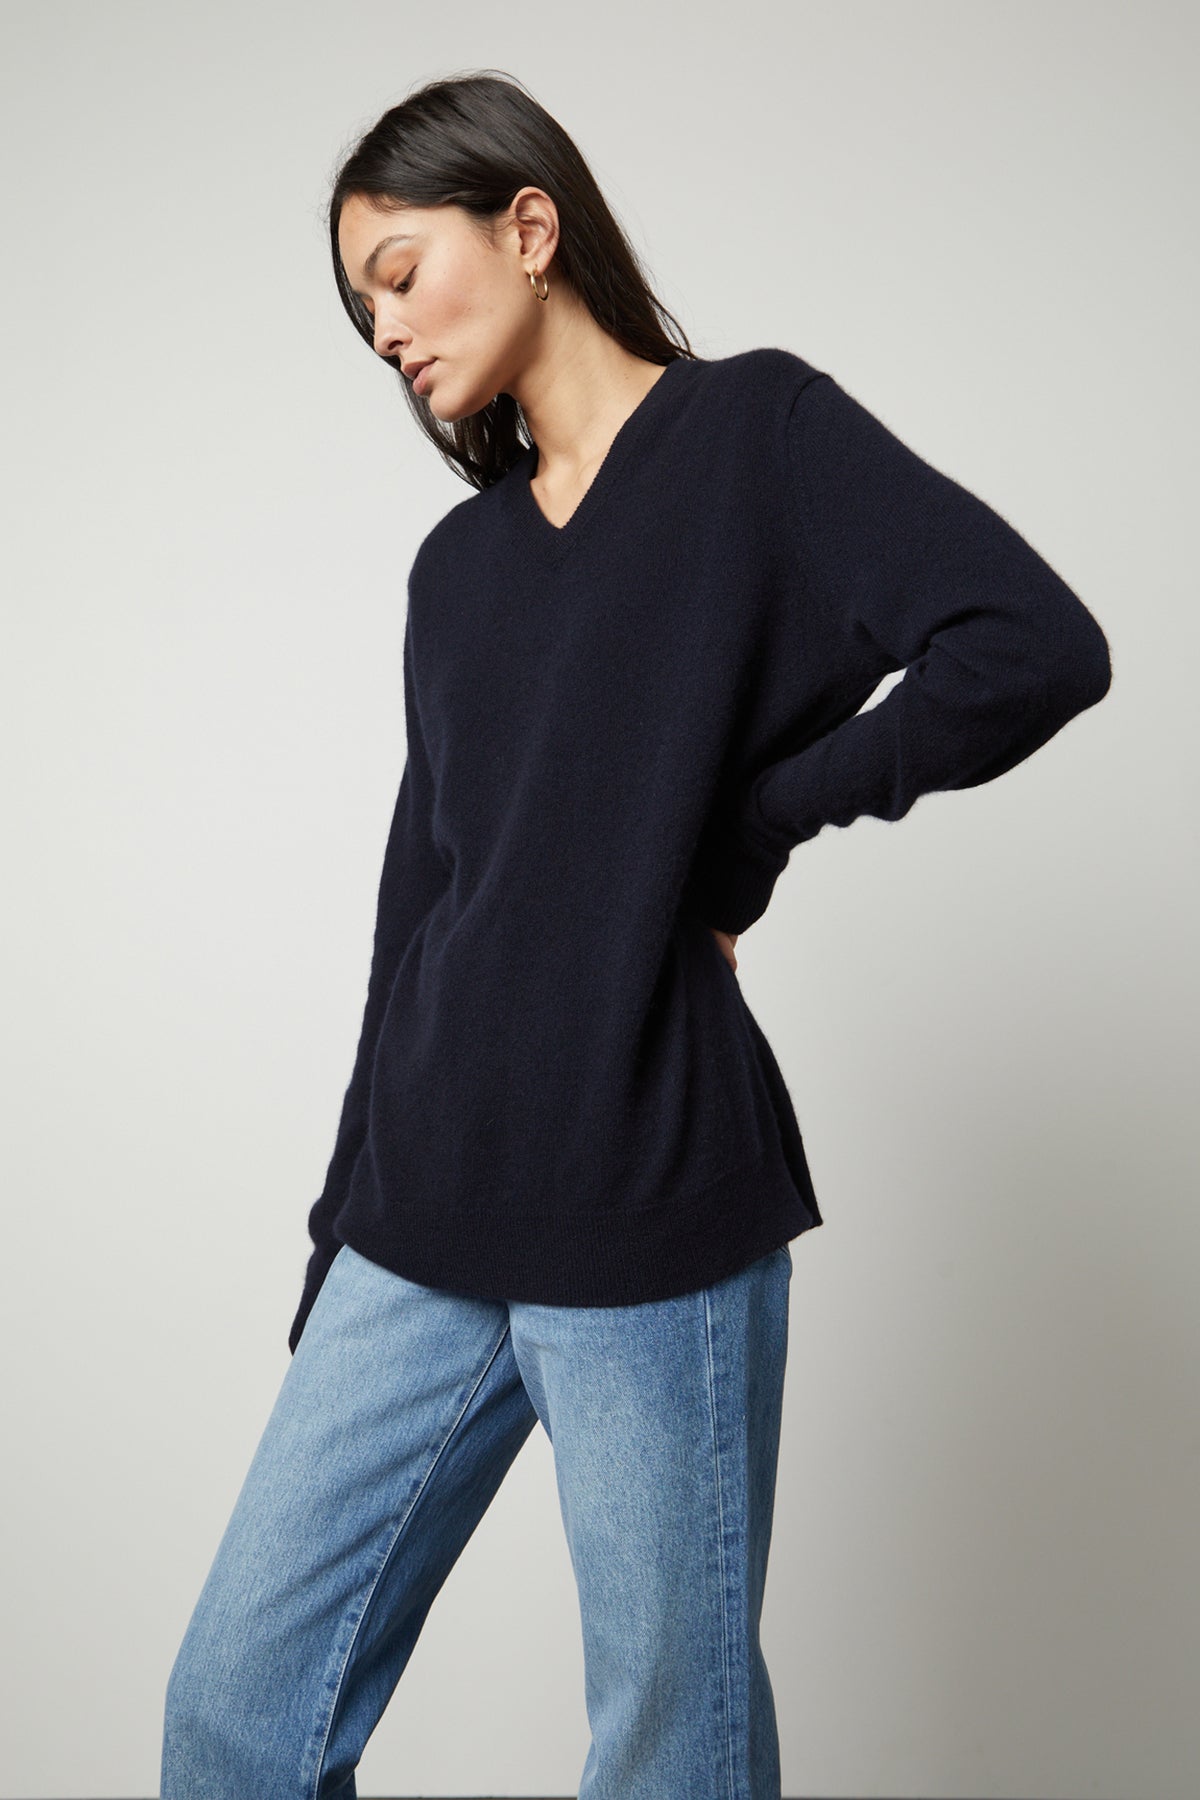 The model is wearing jeans and a Velvet by Graham & Spencer Harmony Cashmere V-Neck Sweater.-26897789681857